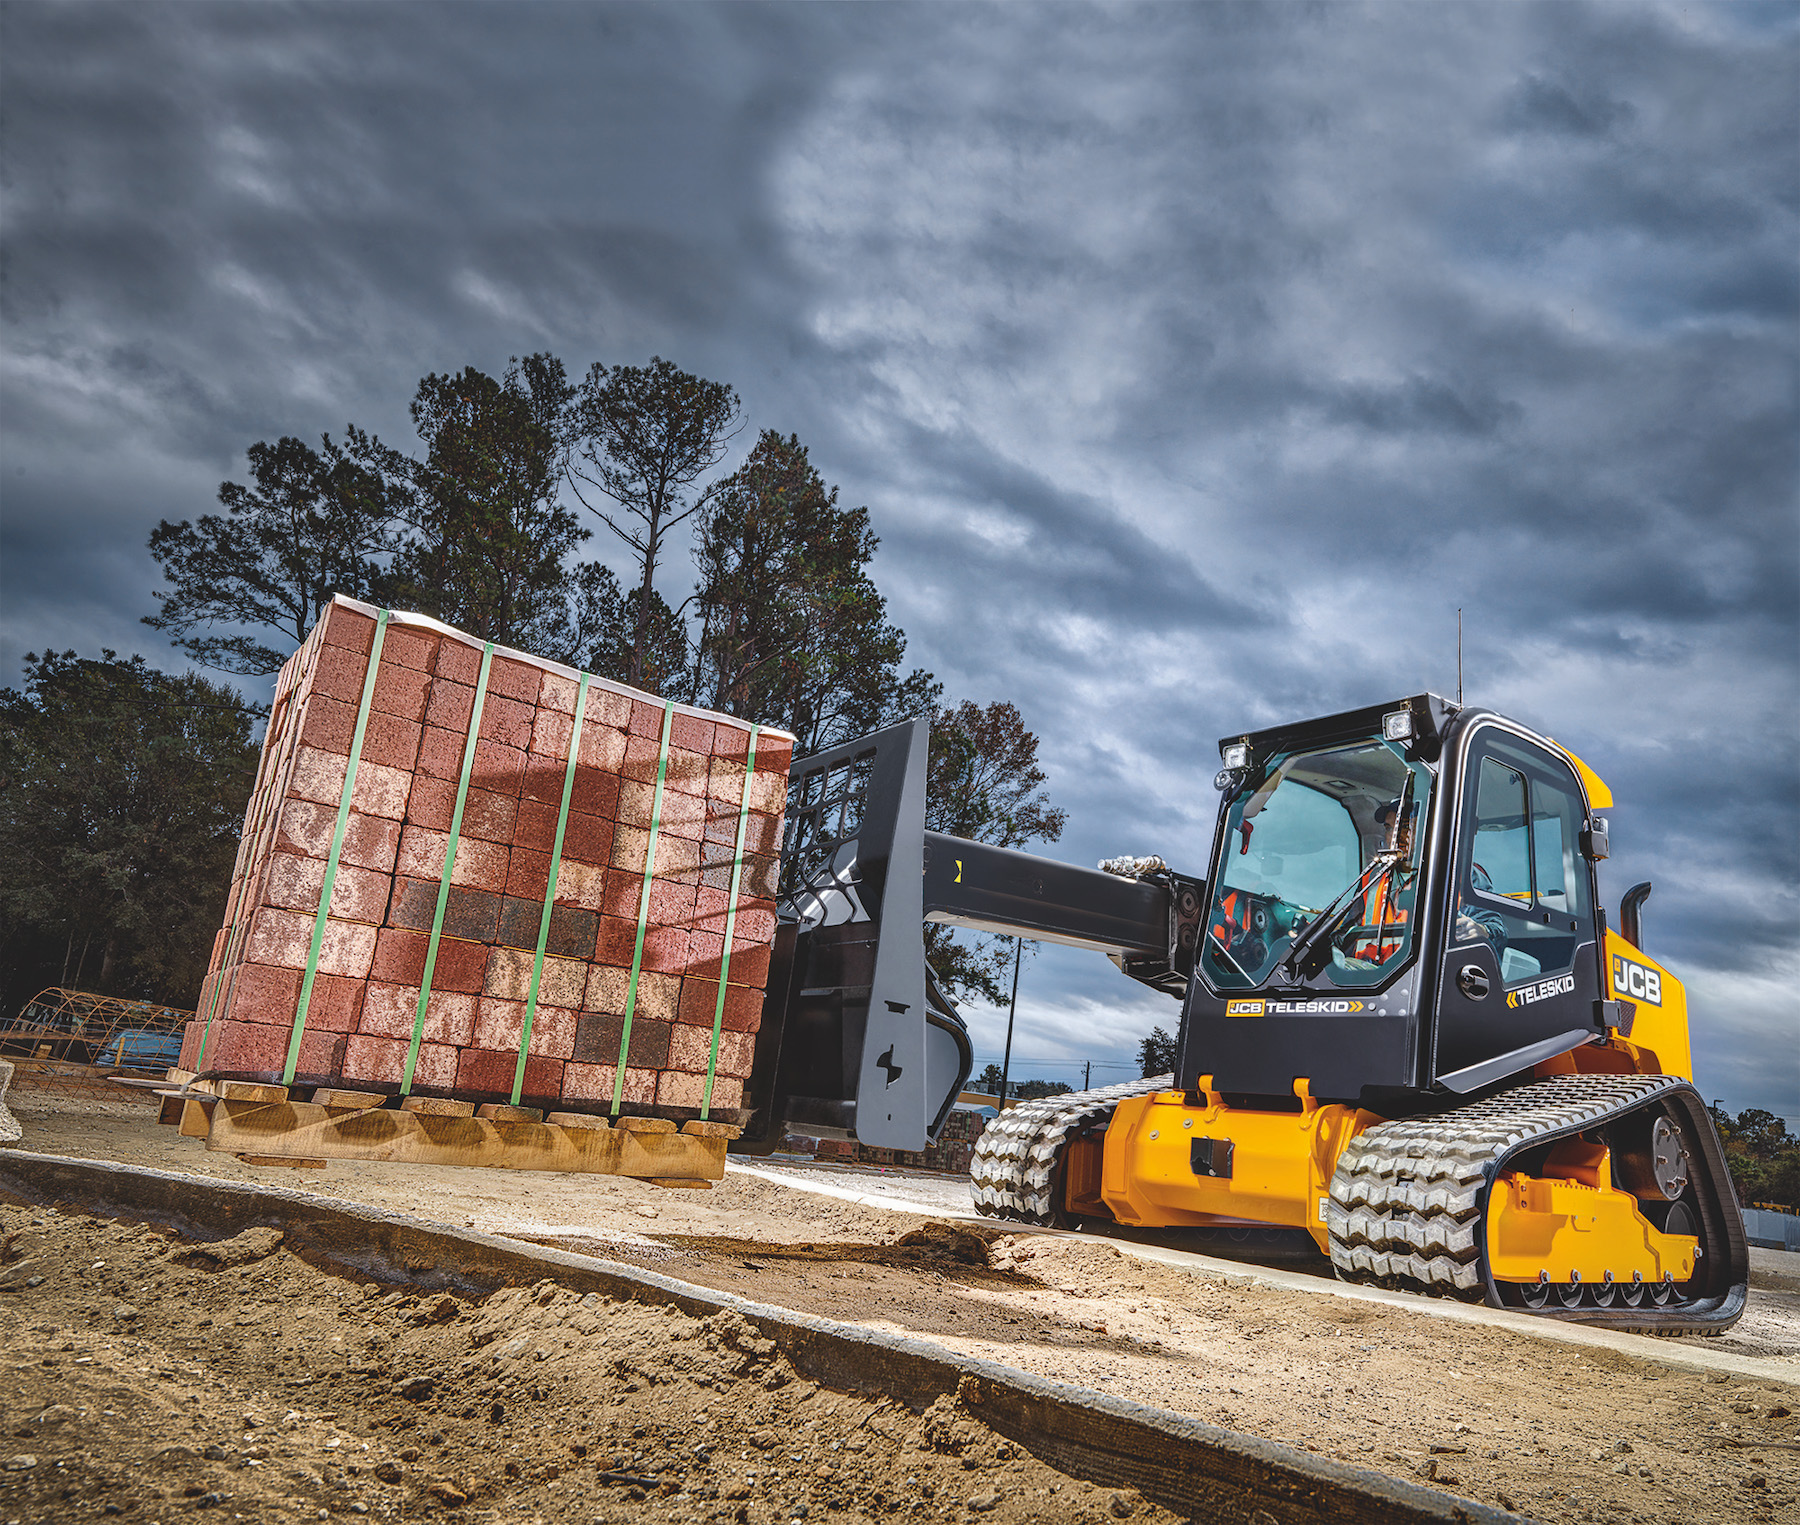 The JCB Teleskid, the world’s only skid steer and compact track loader with a telescopic boom, has won the Gold Award in the Rental Equipment Register 2017 Innovative Product Awards.